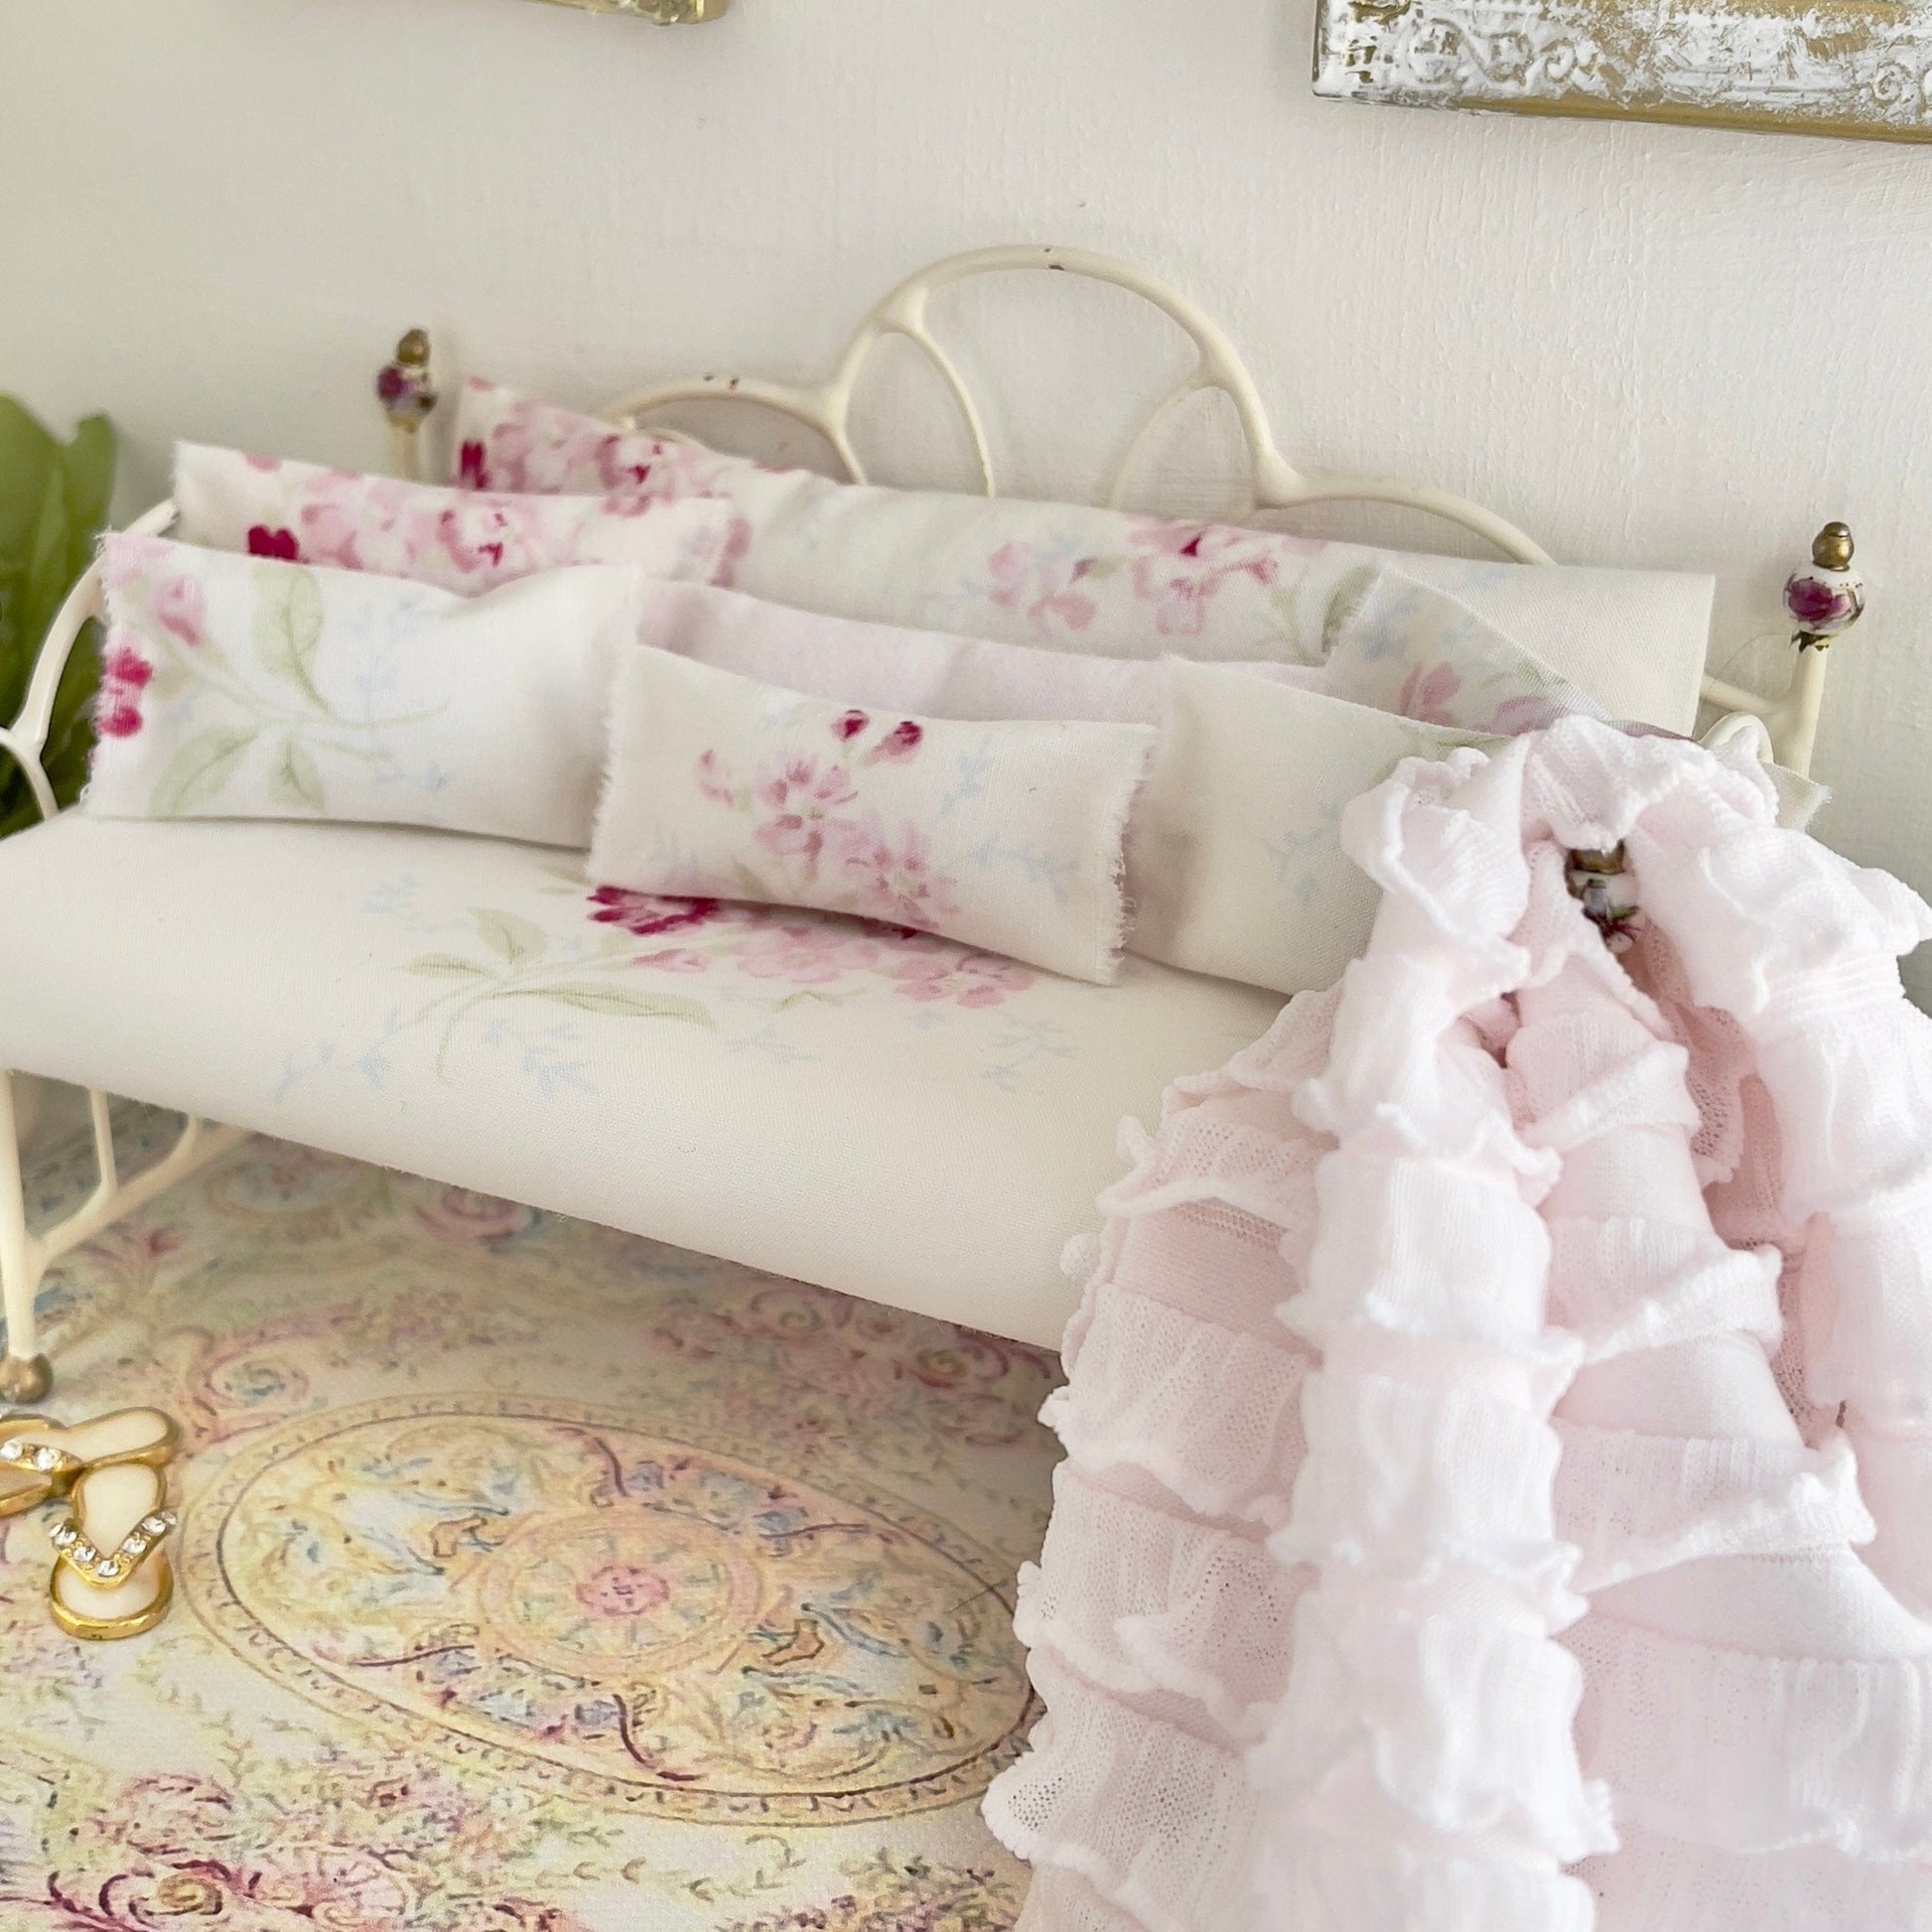 Chantallena Doll House Day Bed | Faded Pink, Blue Florals Cotton Set | Shabby Pink Wildflowers